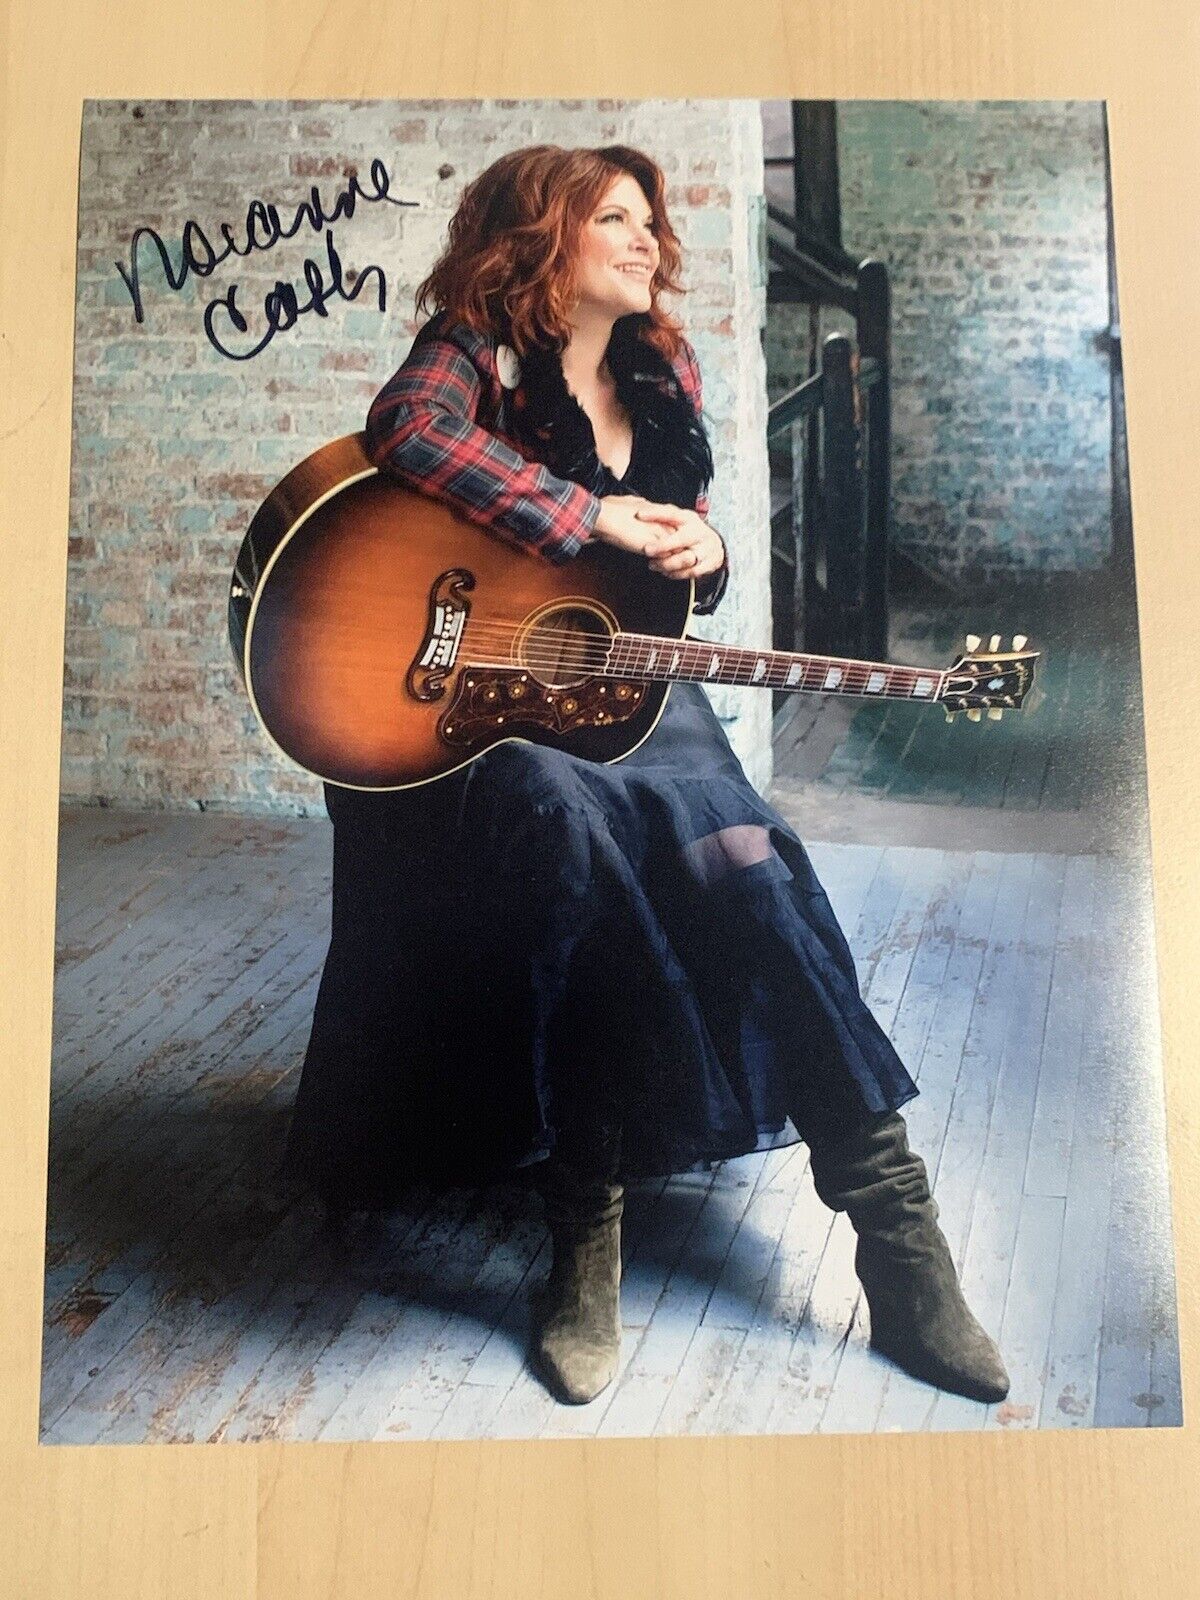 ROSANNE CASH HAND SIGNED 8x10 Photo Poster painting AUTOGRAPHED COUNTRY SINGER RARE COA